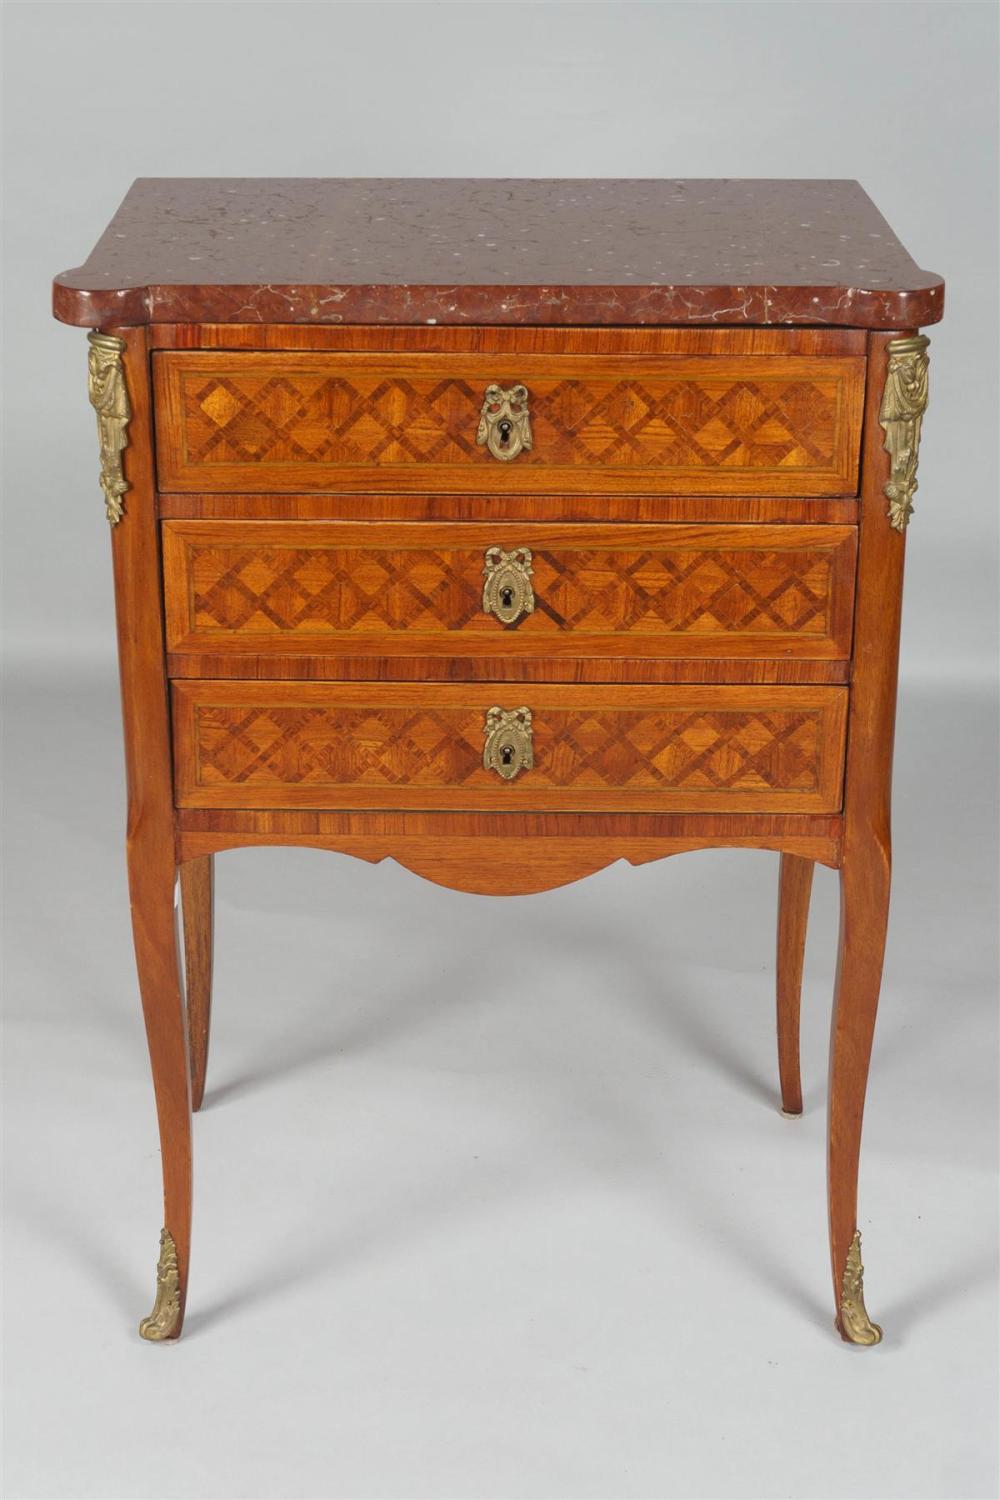 LOUIS XV STYLE AMARANTH AND PARQUETRY 33b8ef